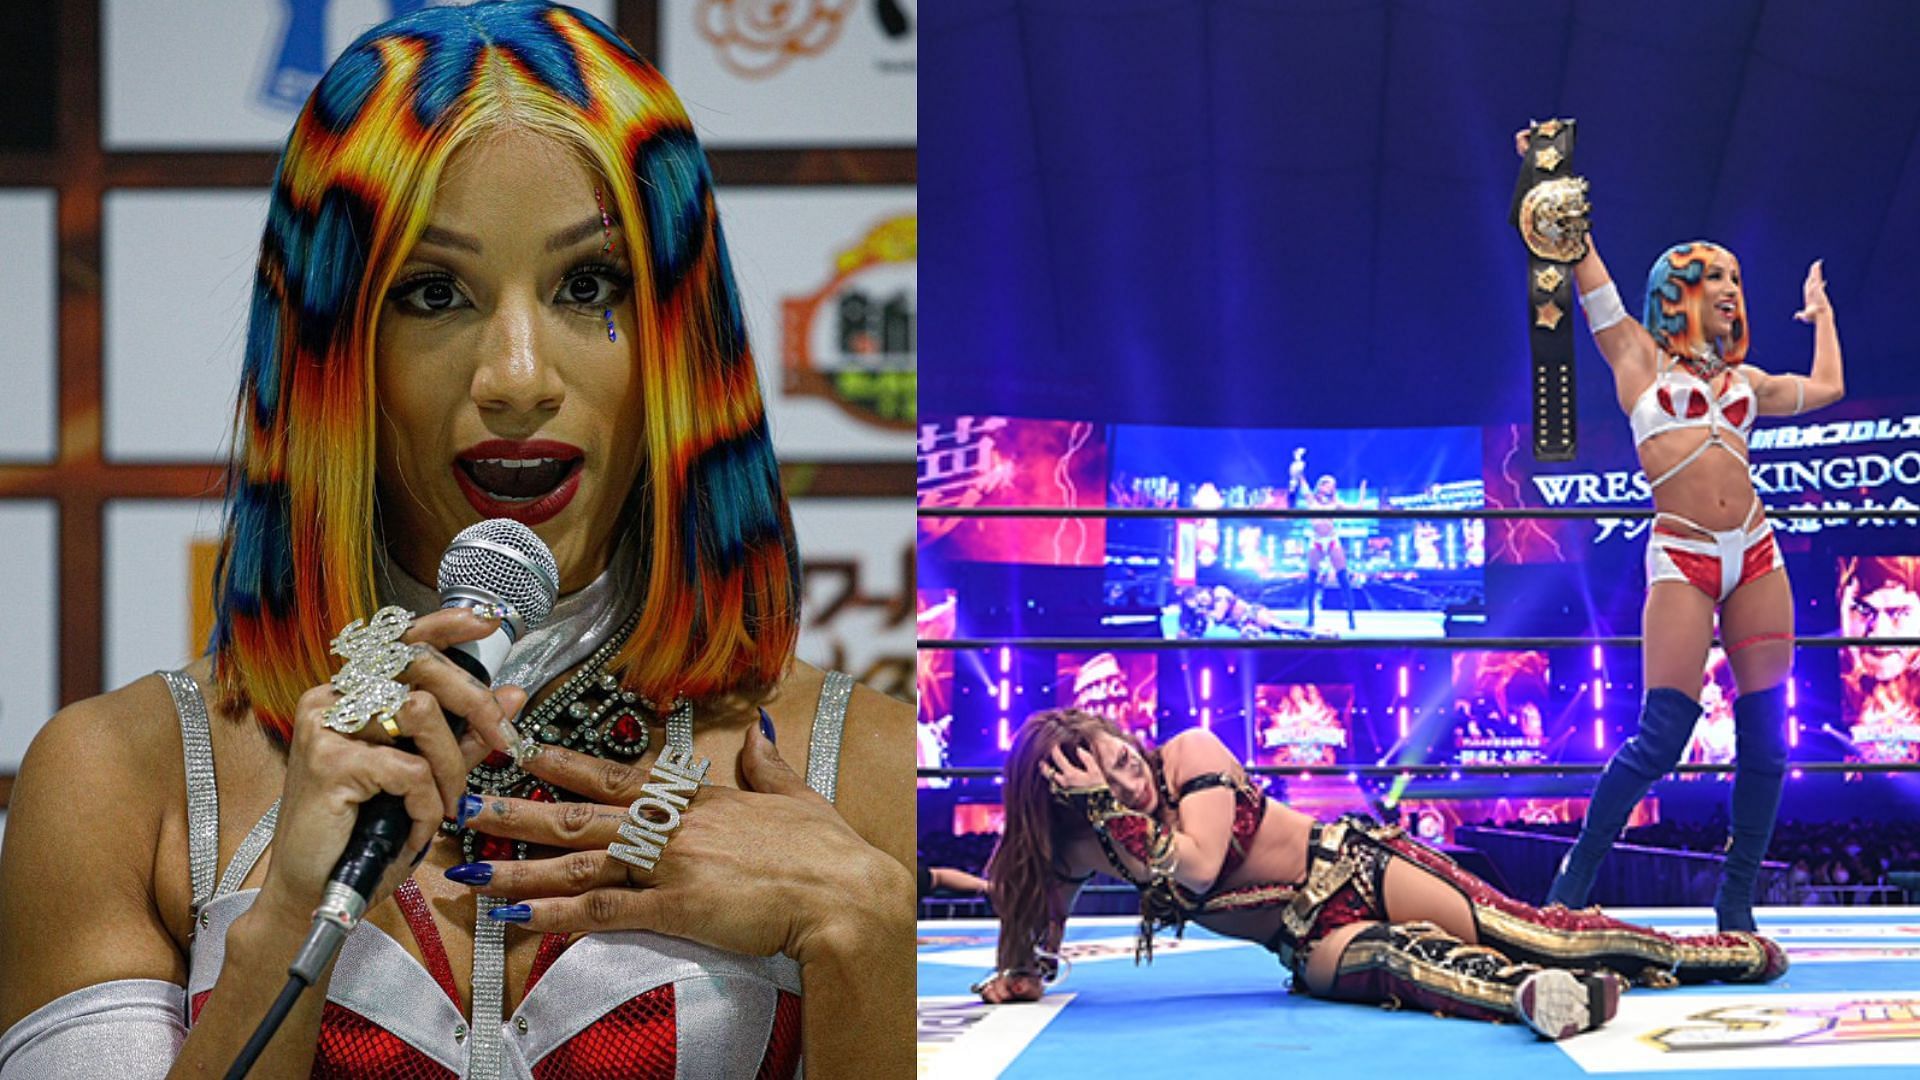 Mercedes Mone recently appeared at Wrestle Kingdom 17